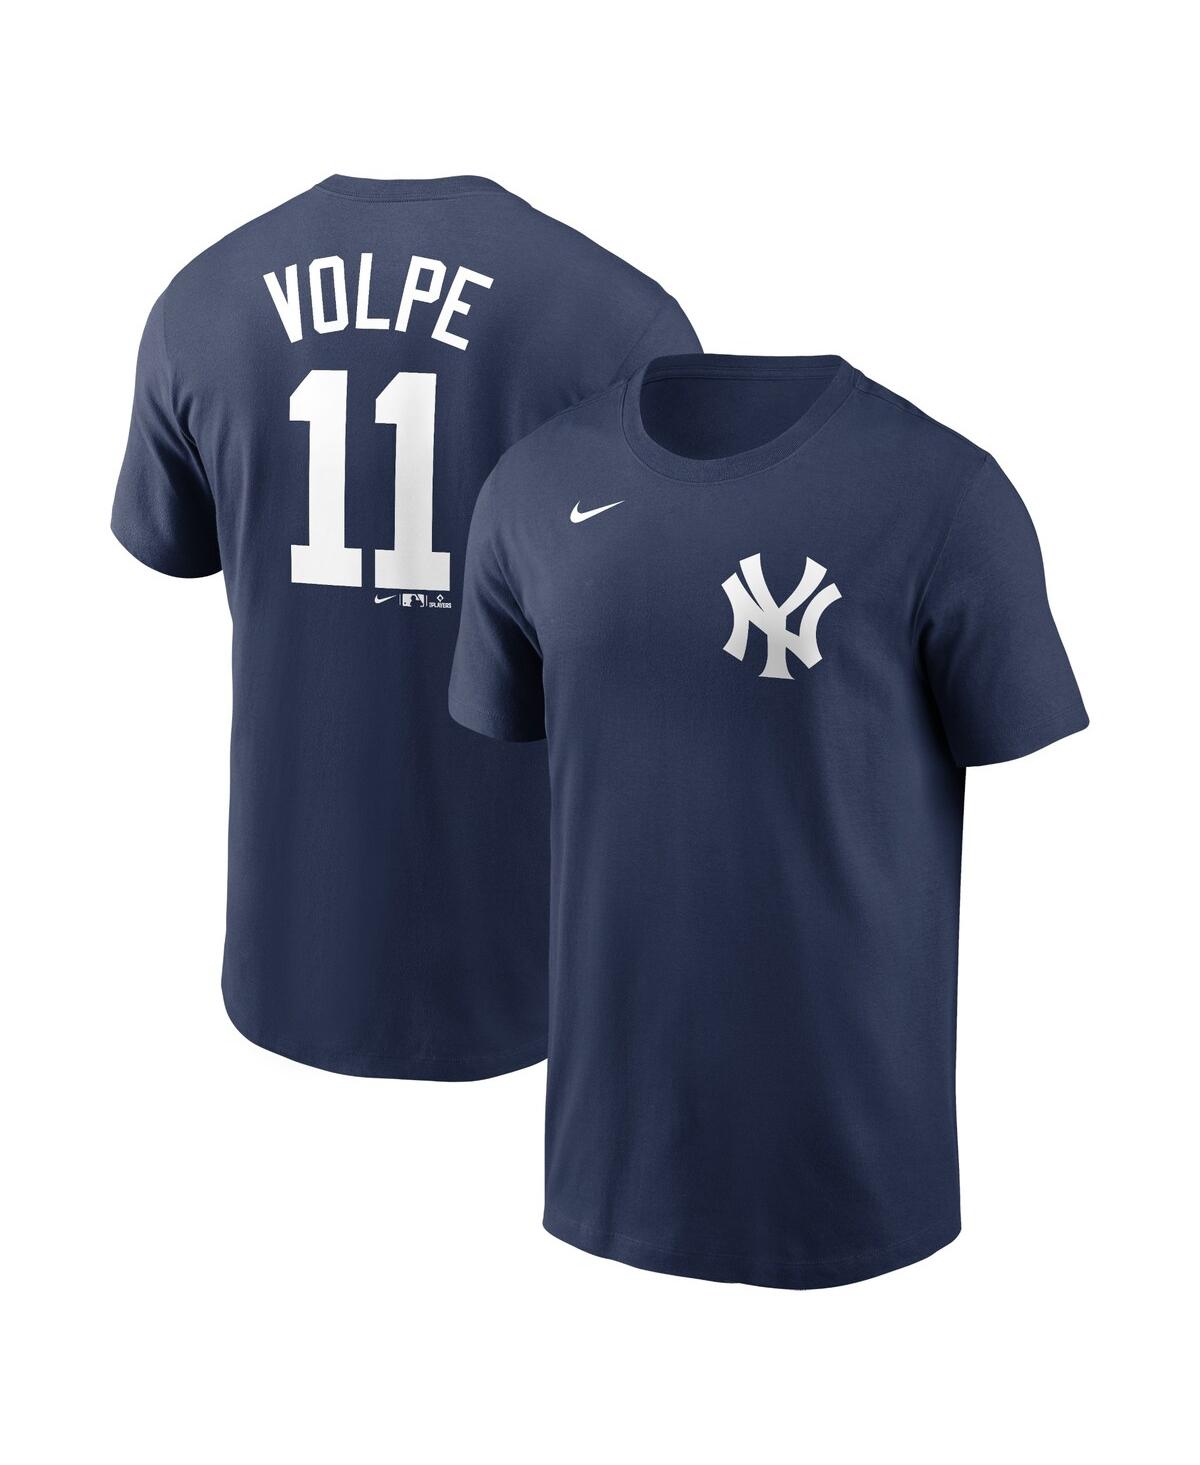 Nike Kids' Big Boys And Girls  Anthony Volpe Navy New York Yankees Name And Number T-shirt